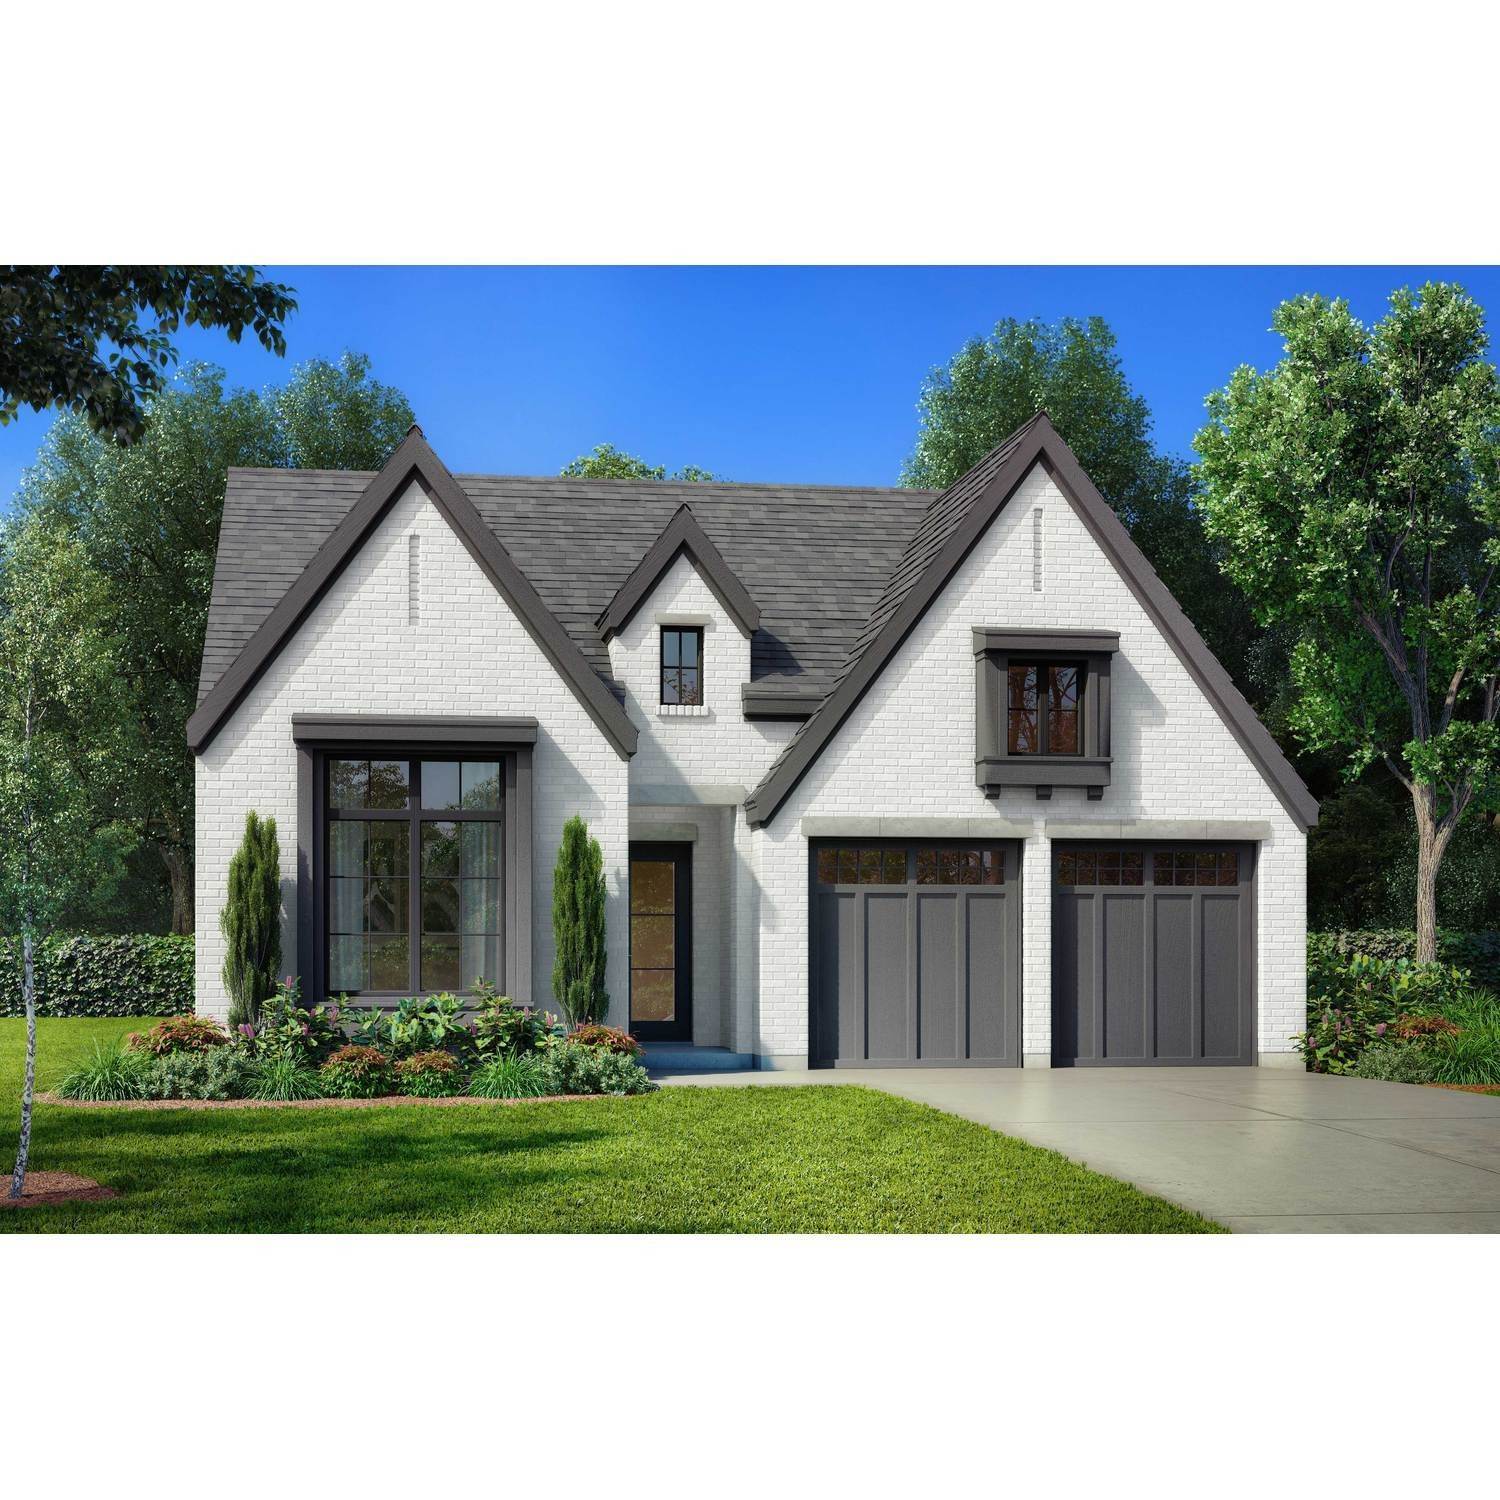 Single Family for Sale at Fields - 50' Lots Coming Soon!, Frisco, TX 75033